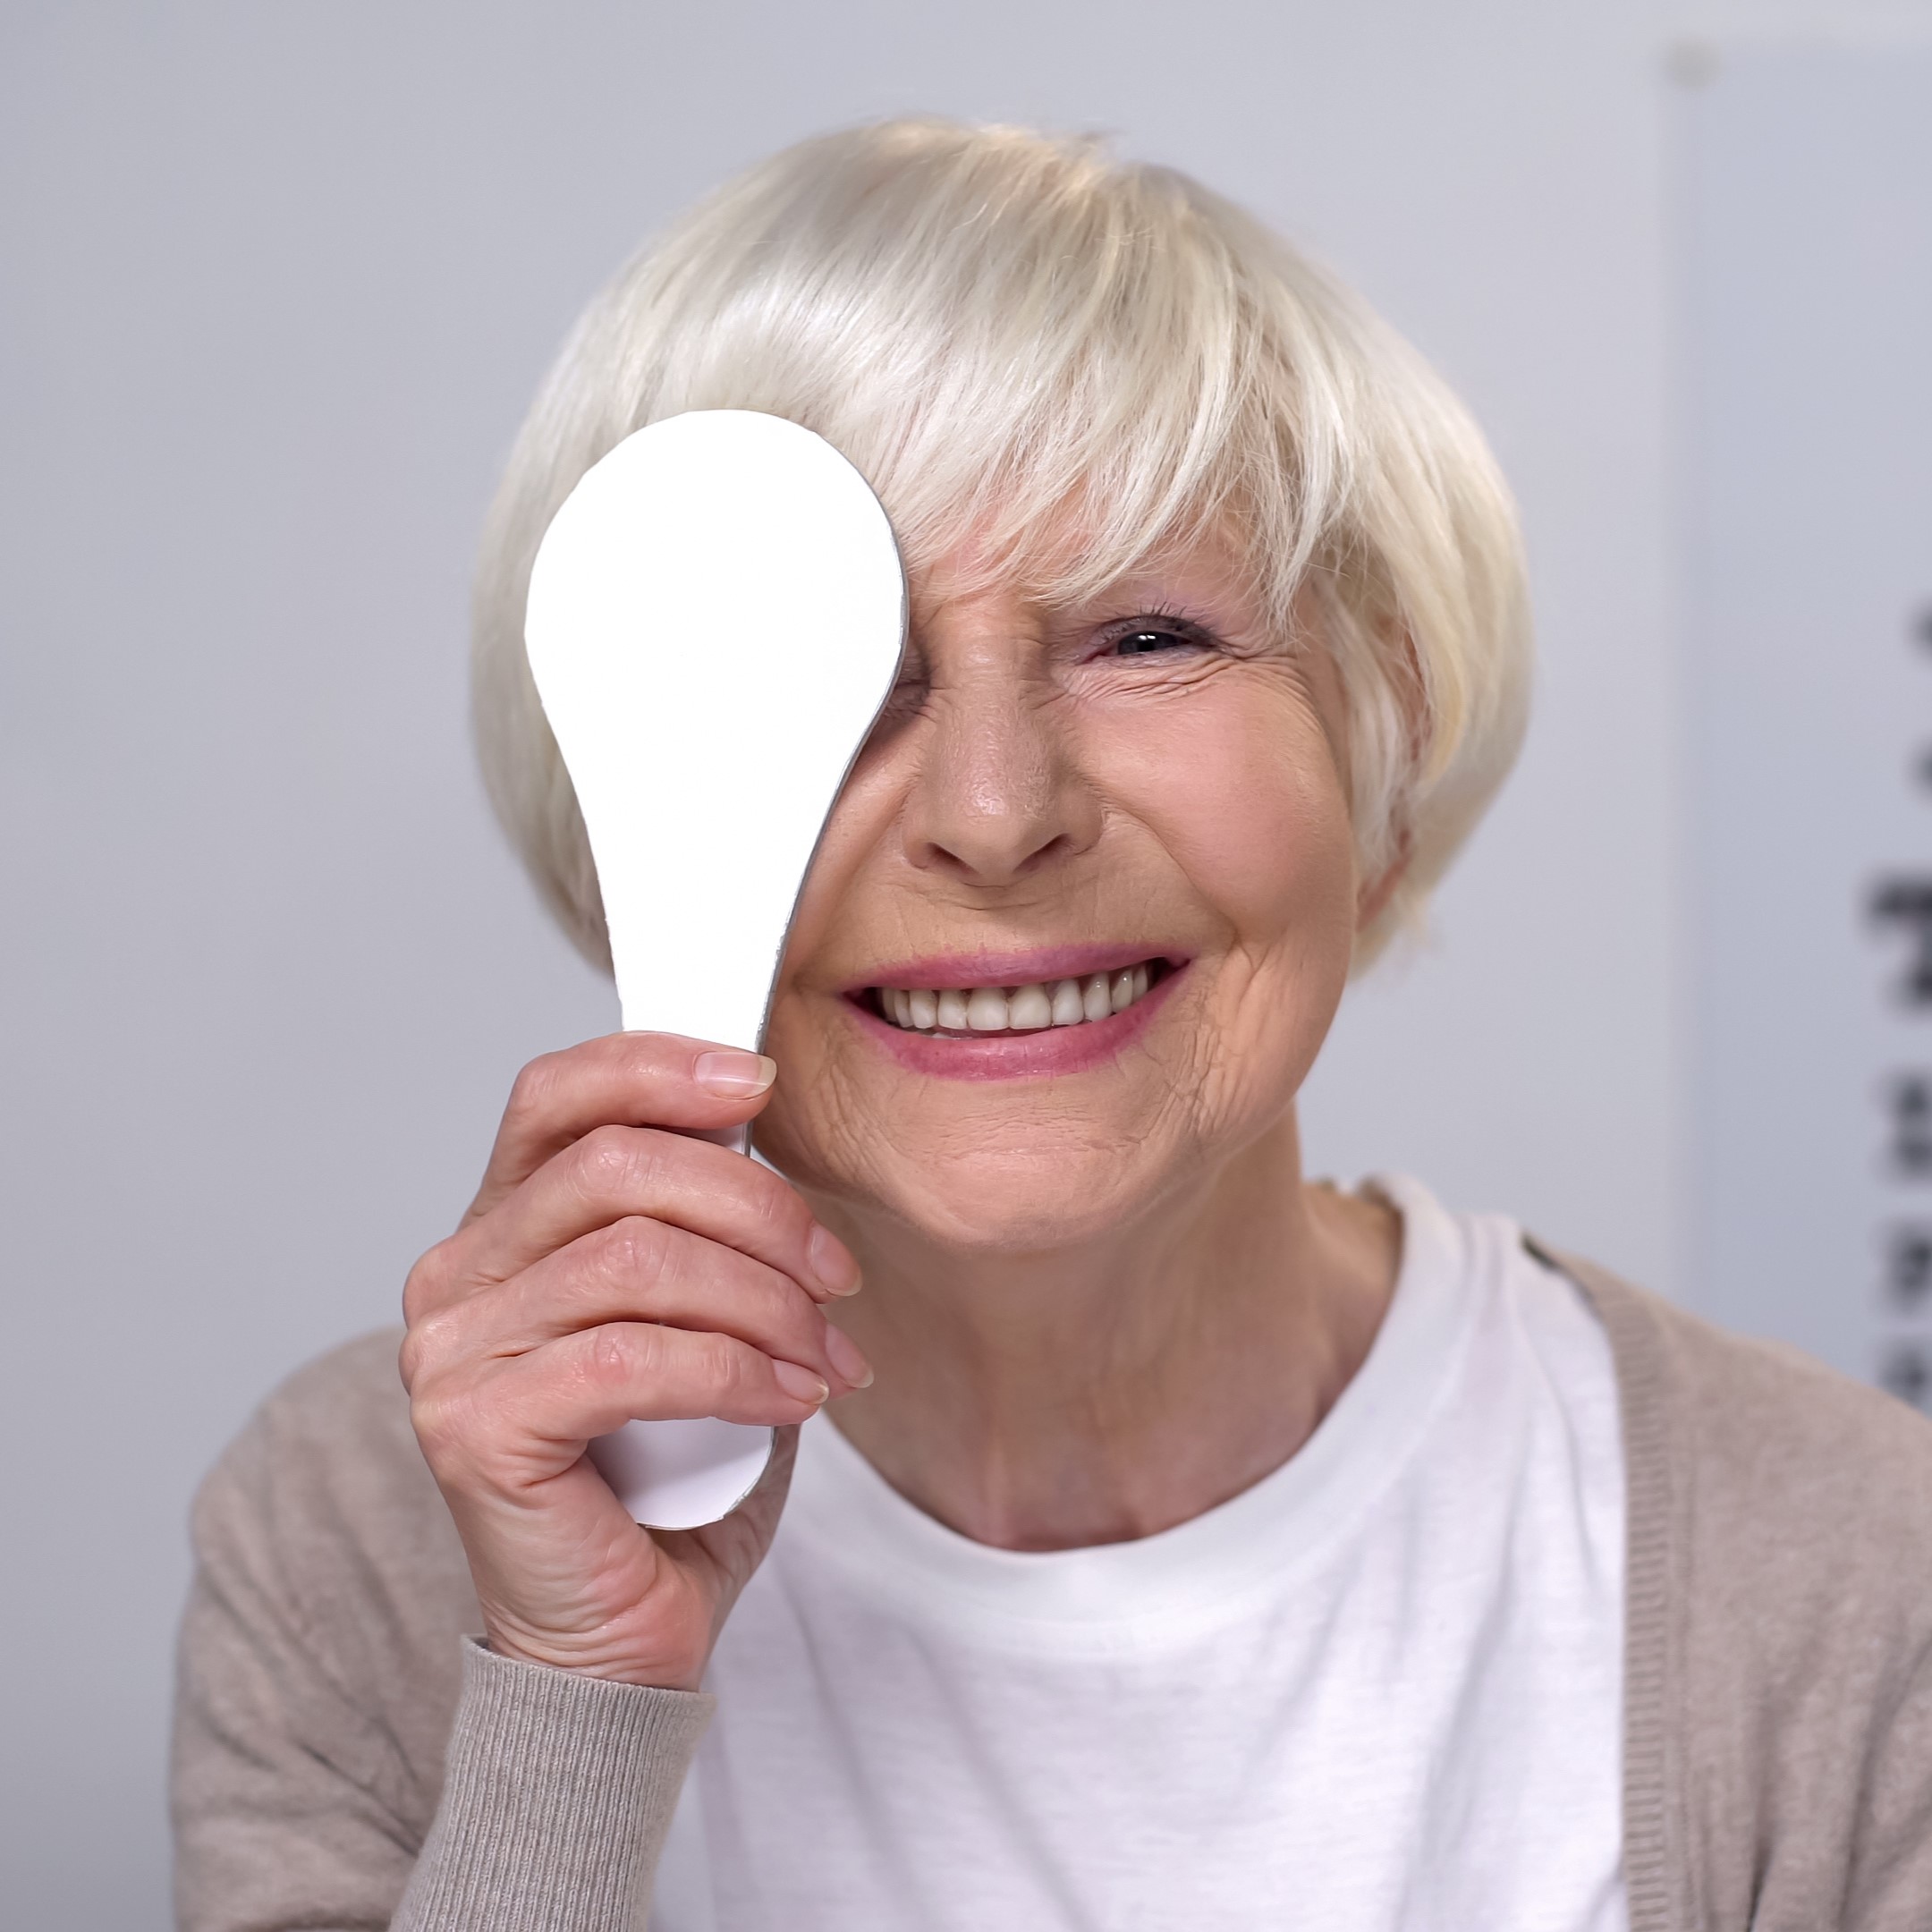 Retired female closing eye and smiling to camera, successful cataract surgery